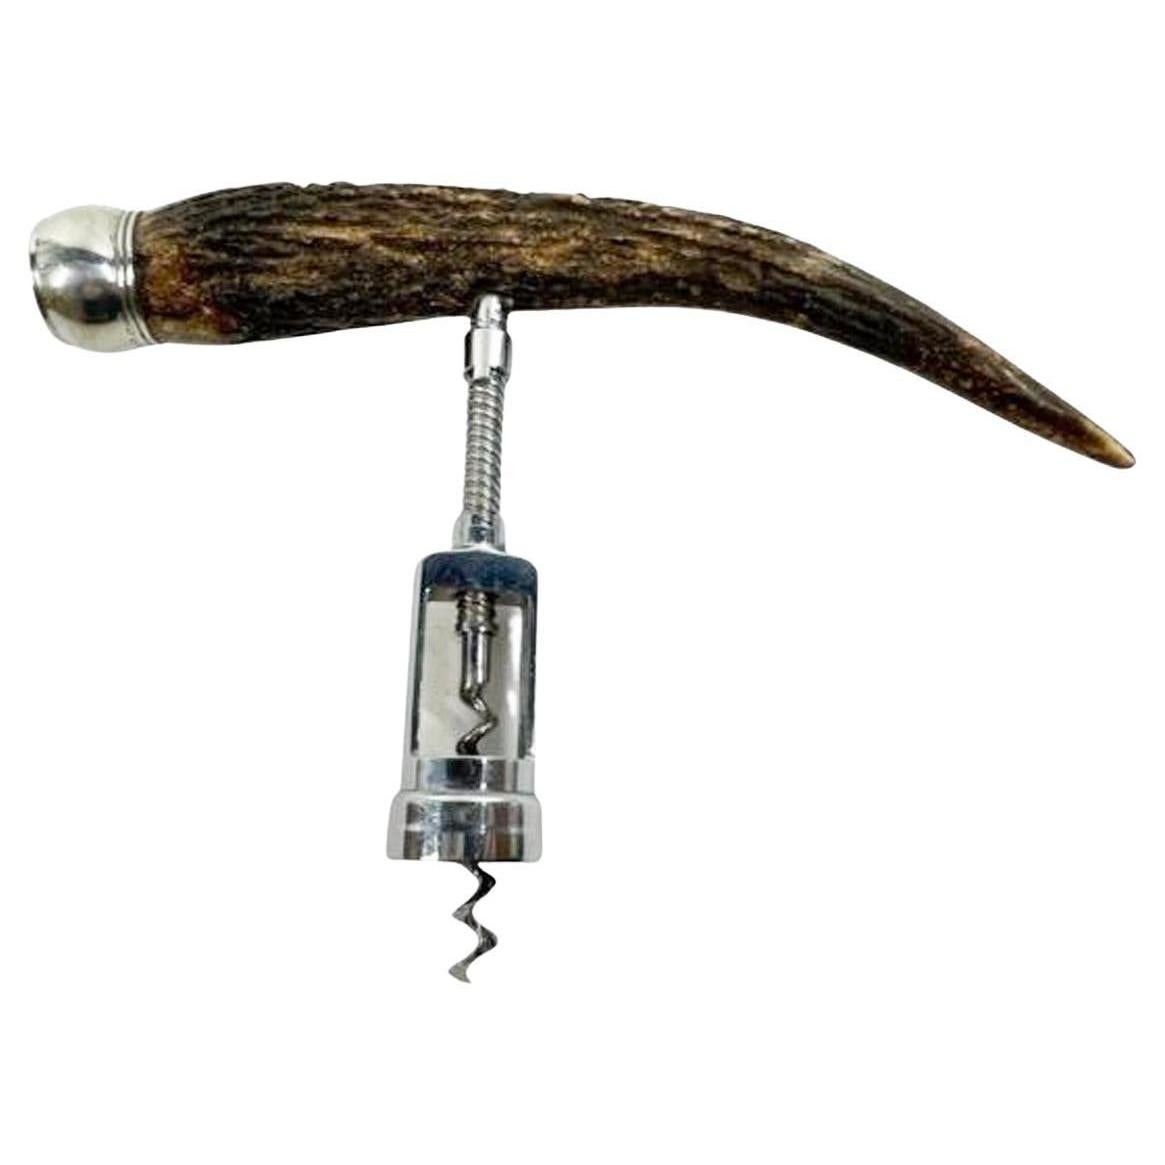 C.1900 John Hasselbring Sterling Capped Stag Horn Corkscrew, 10" Cap to Tip For Sale